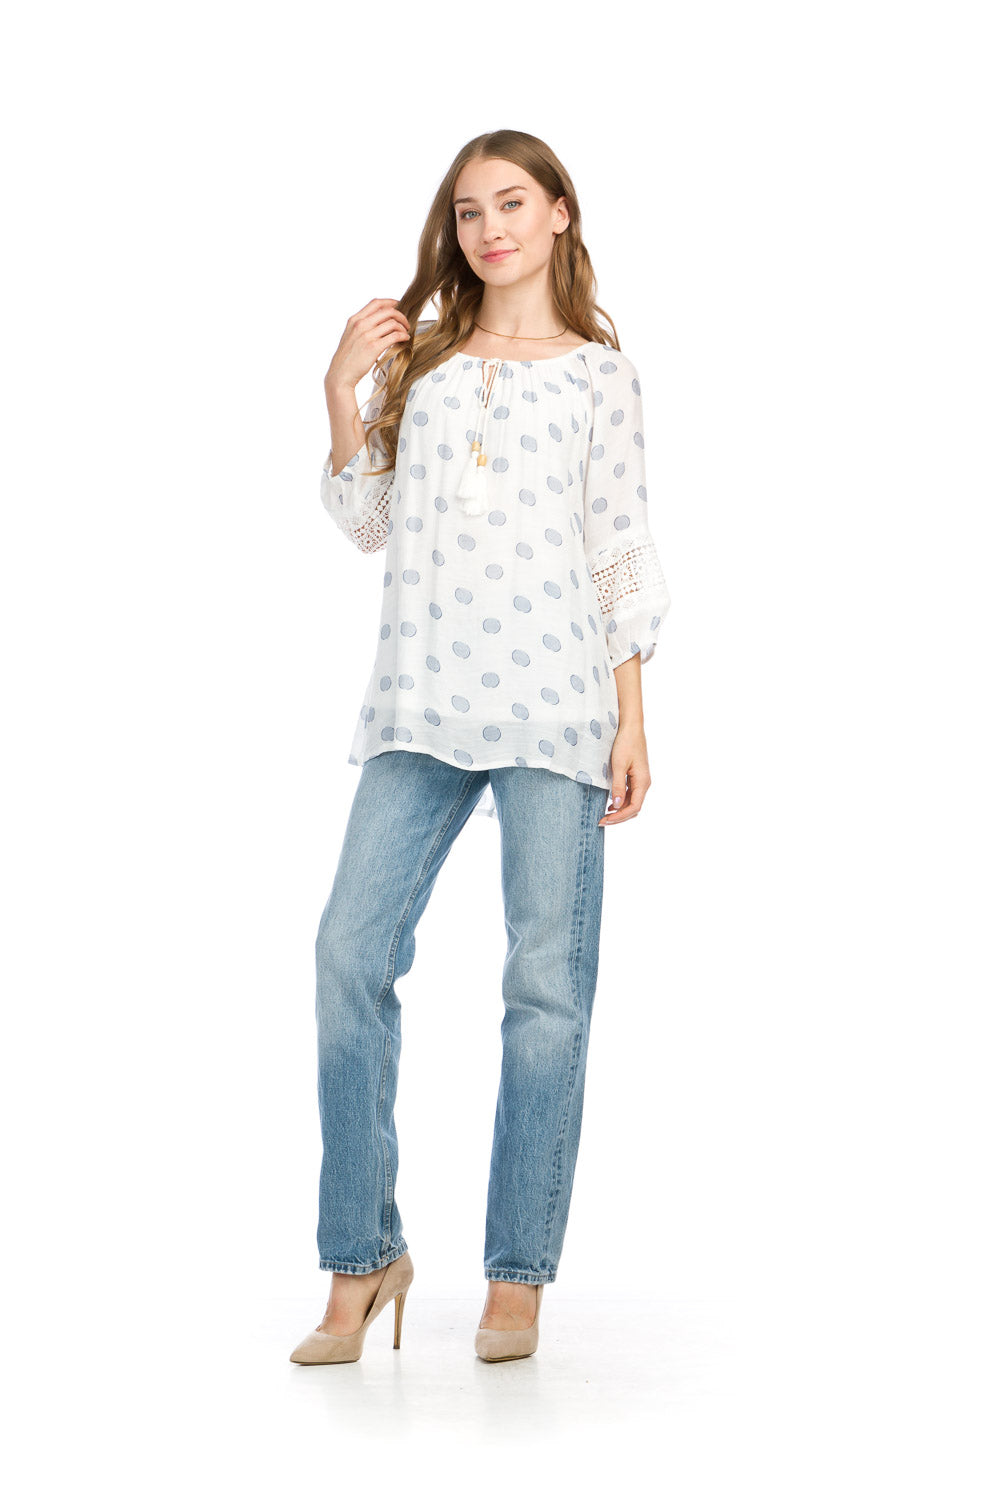 PT16023 WHITE Polka Dot Blouse with Lace Detail